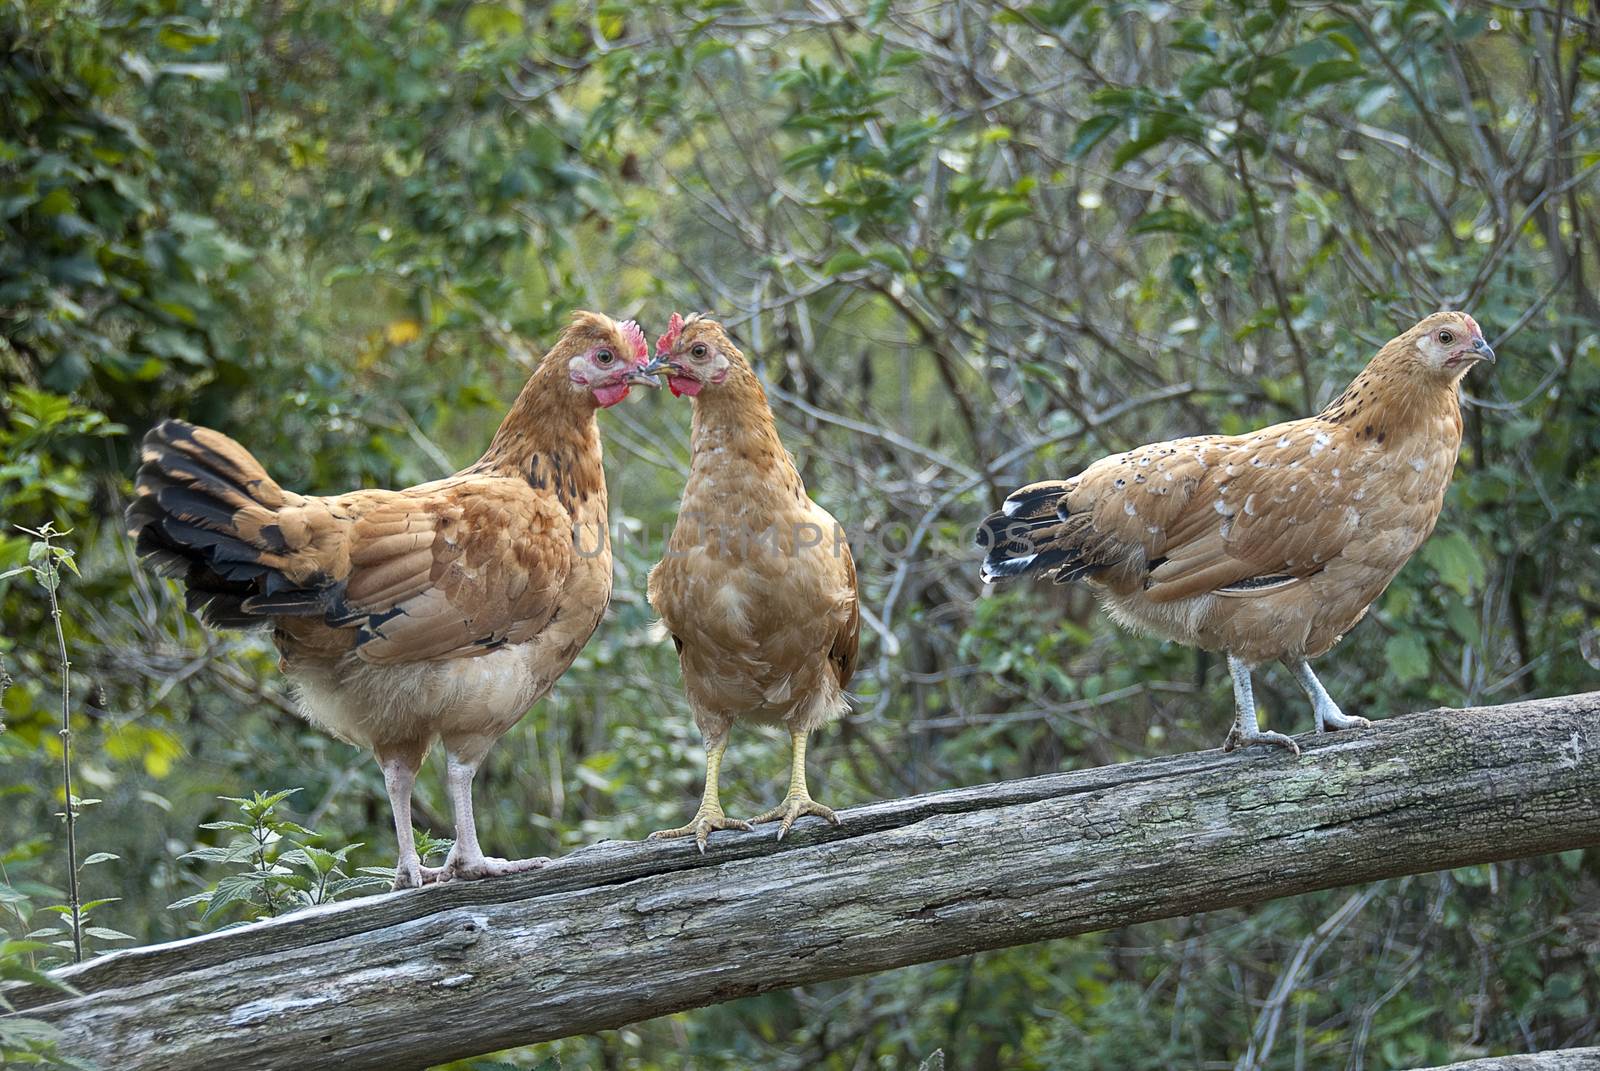 Three Hens raised to a trunk